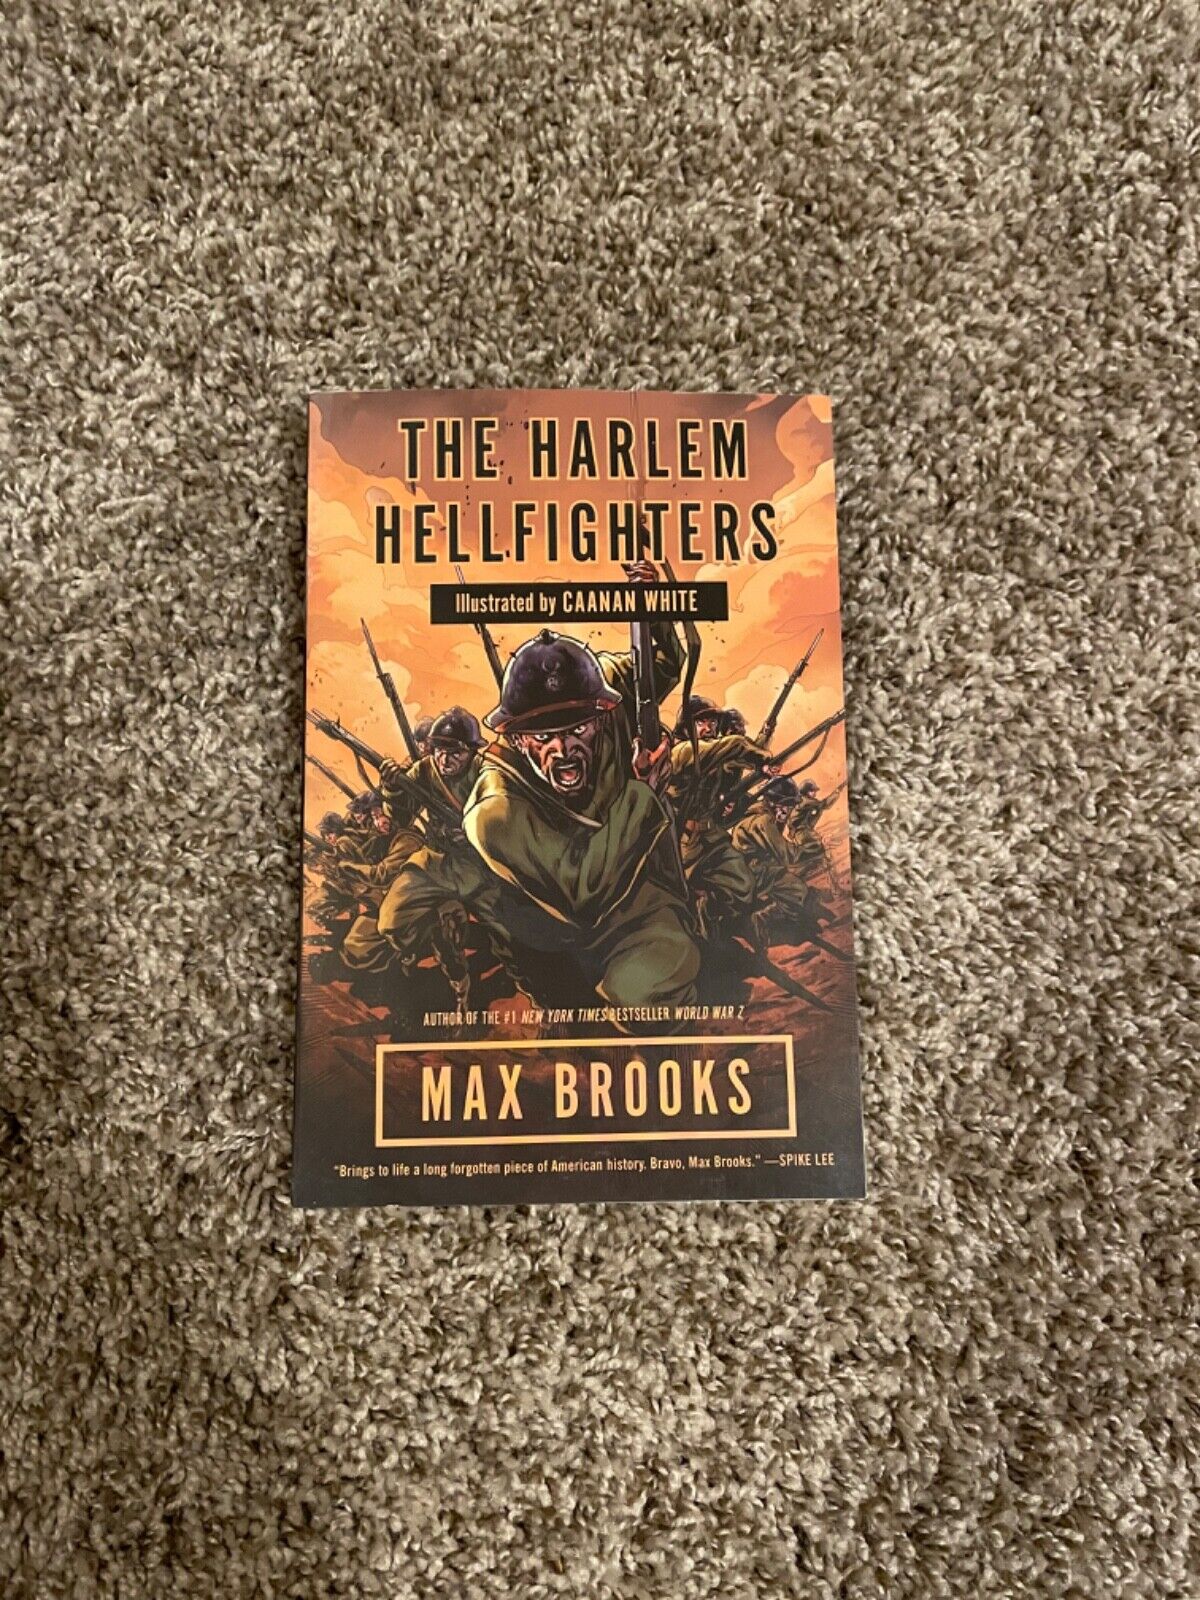 The Harlem Hellfighters: A Graphic Novel by Max Brooks, WWI heroes